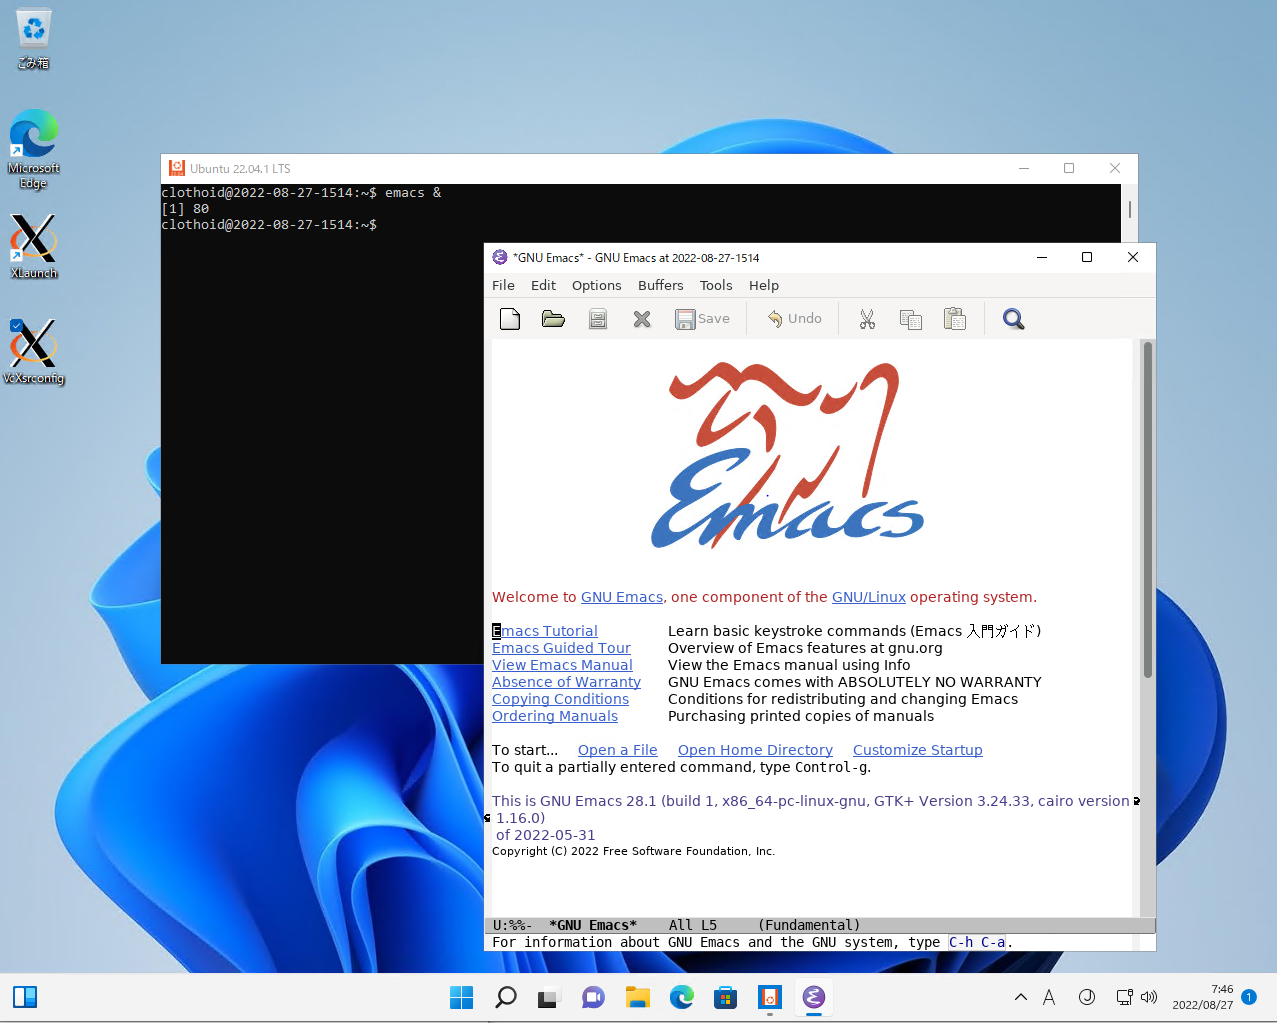 emacs28-on-Ubuntu-22.04-with-WSL2-in-Windows11.png